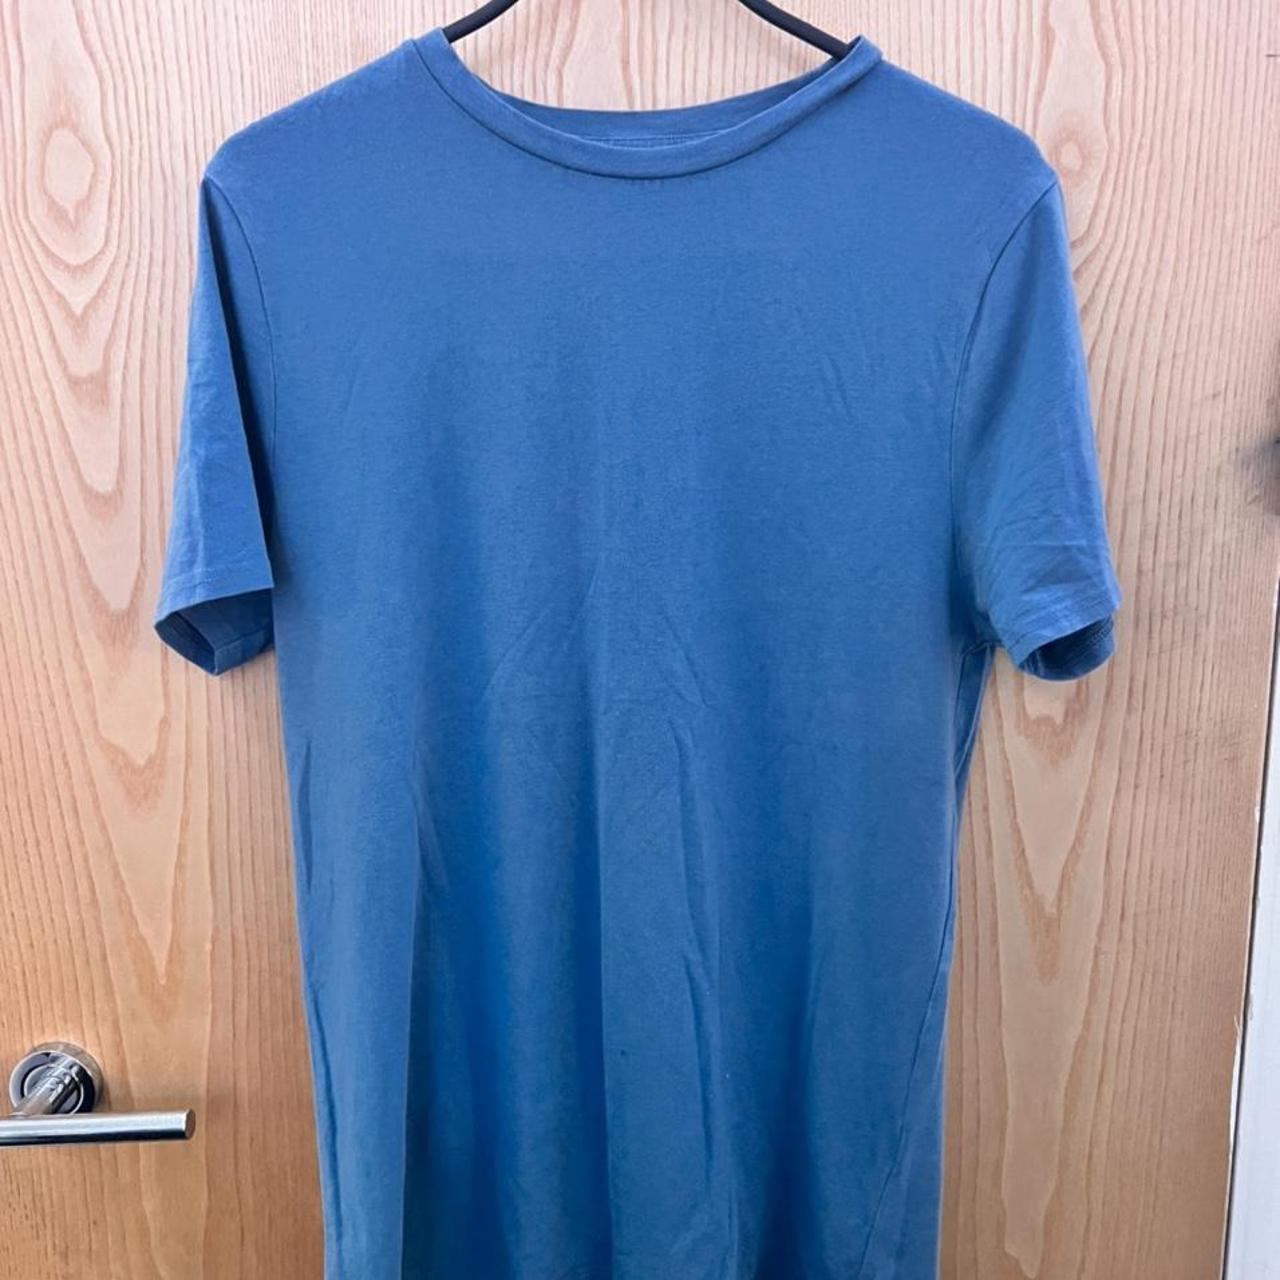 River island muscle fit t-shirt - M Hardly... - Depop